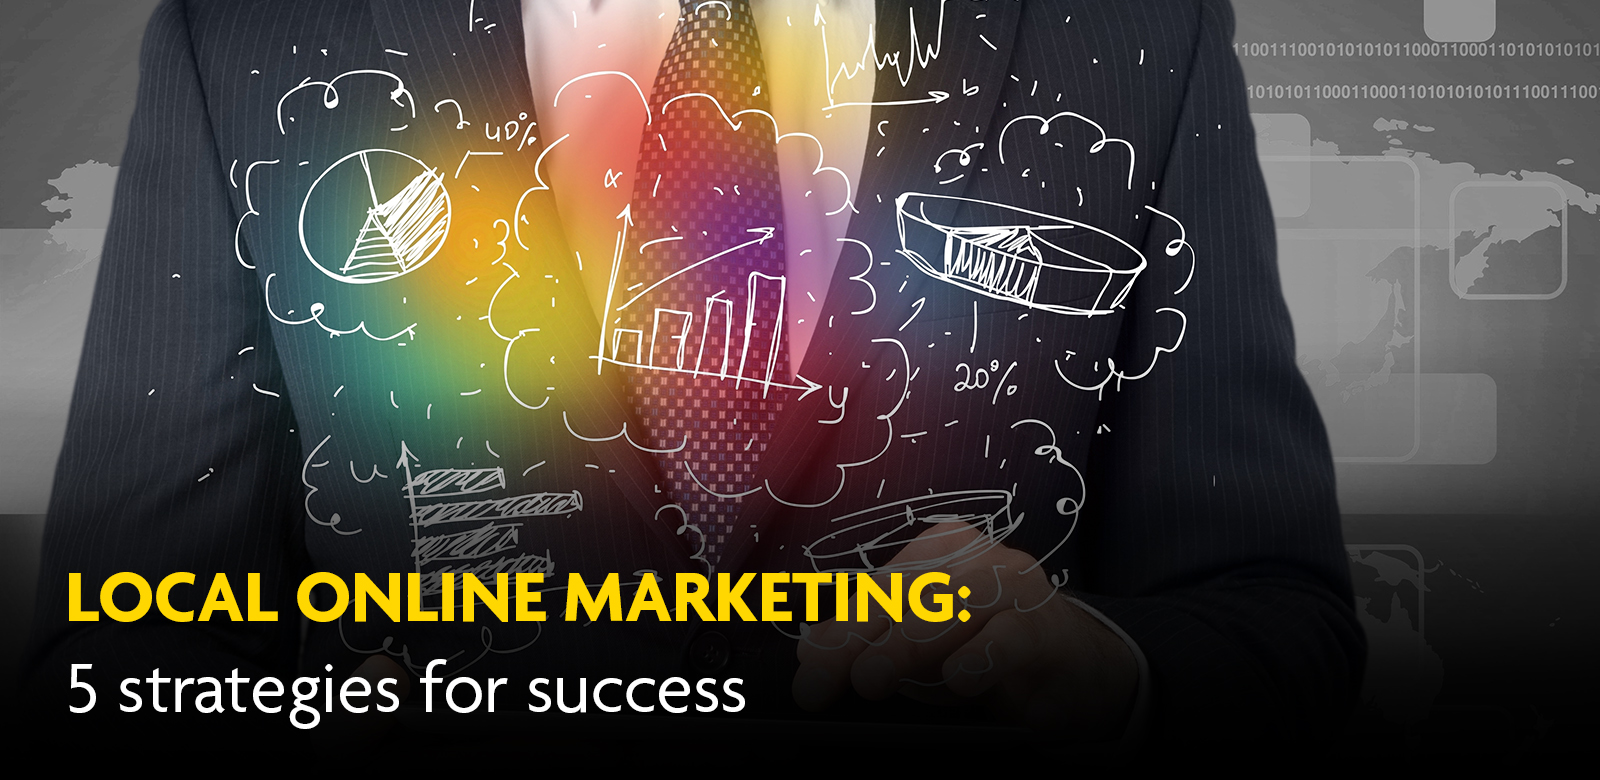 Local online marketing: 5 strategies for success